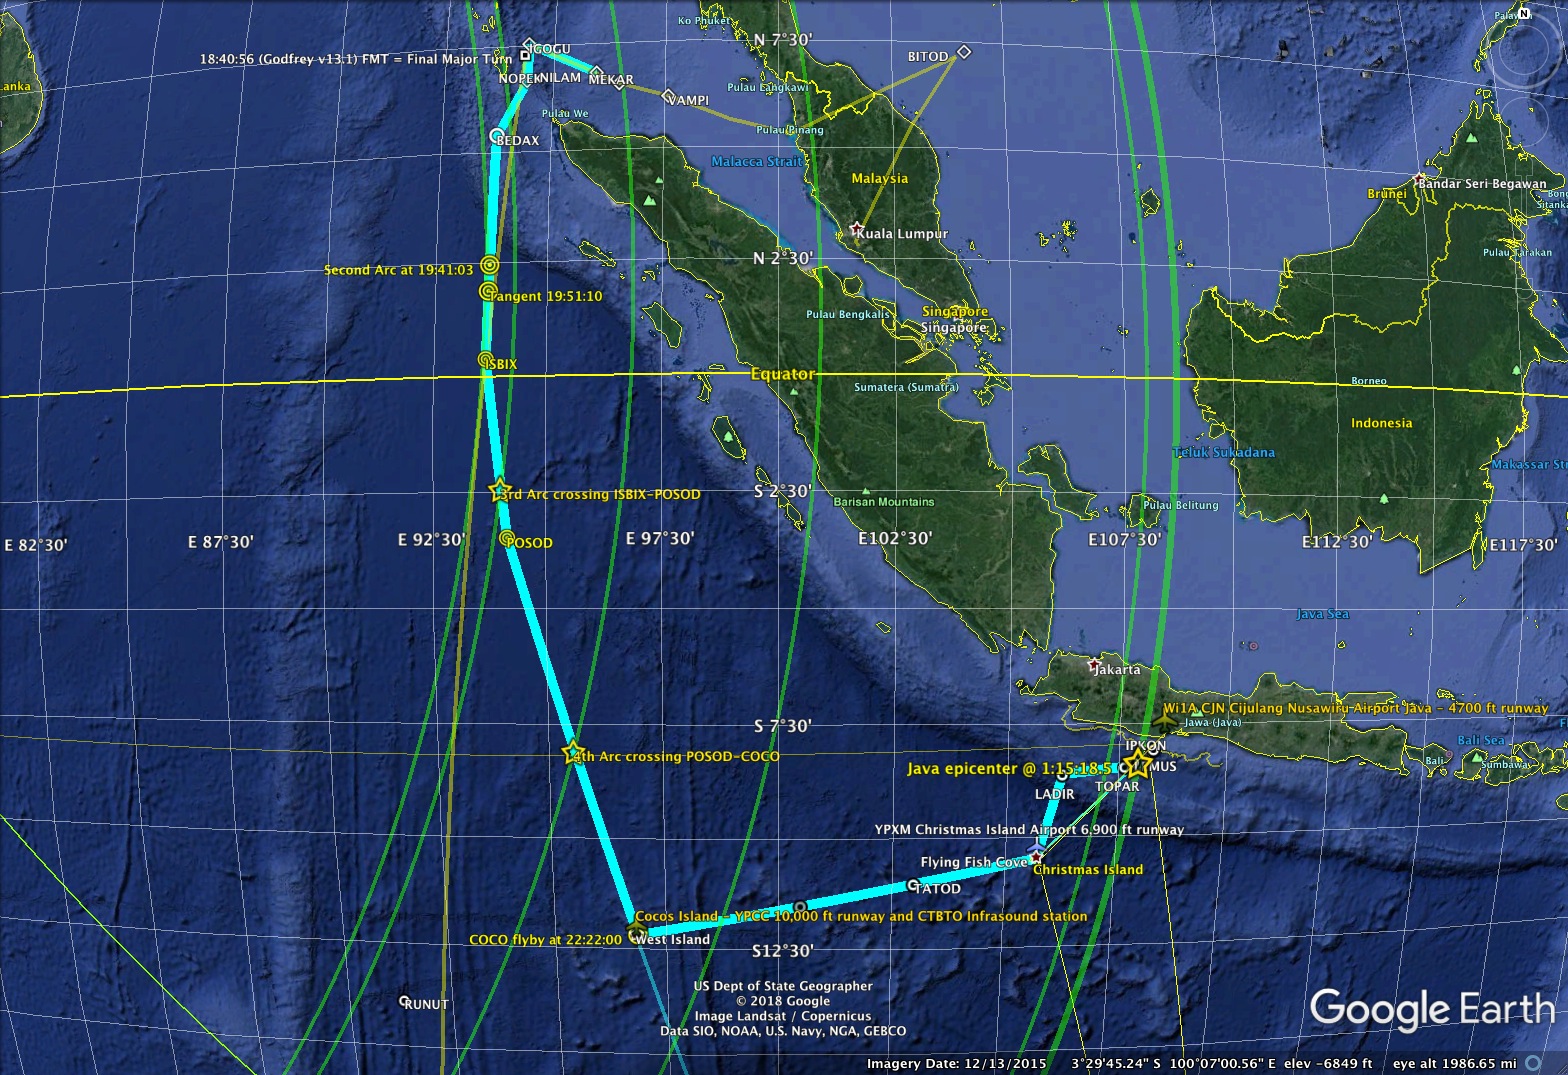 MH370 waypoint path map image.